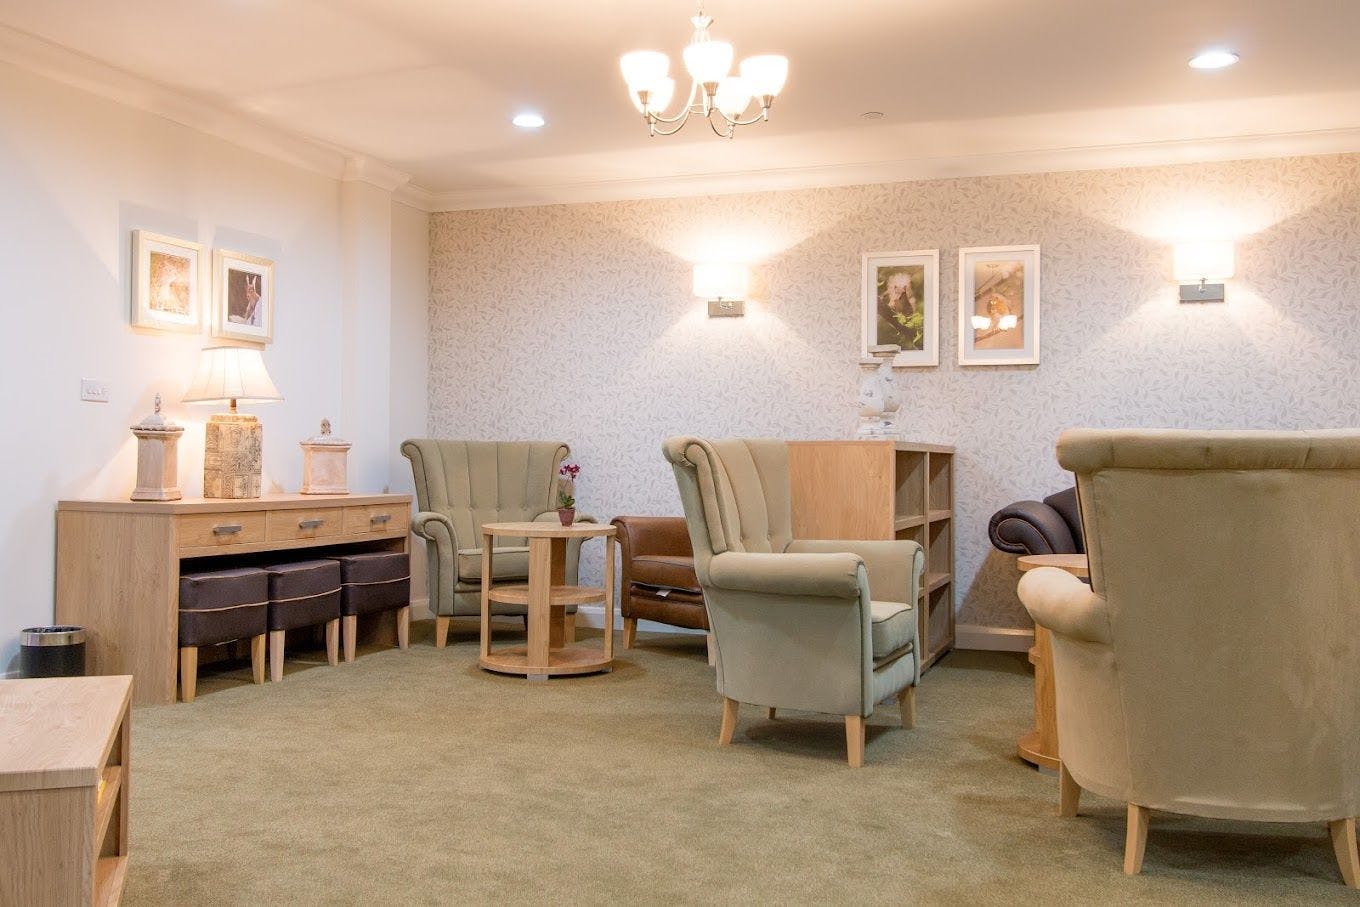 Care UK - The Potteries care home 7